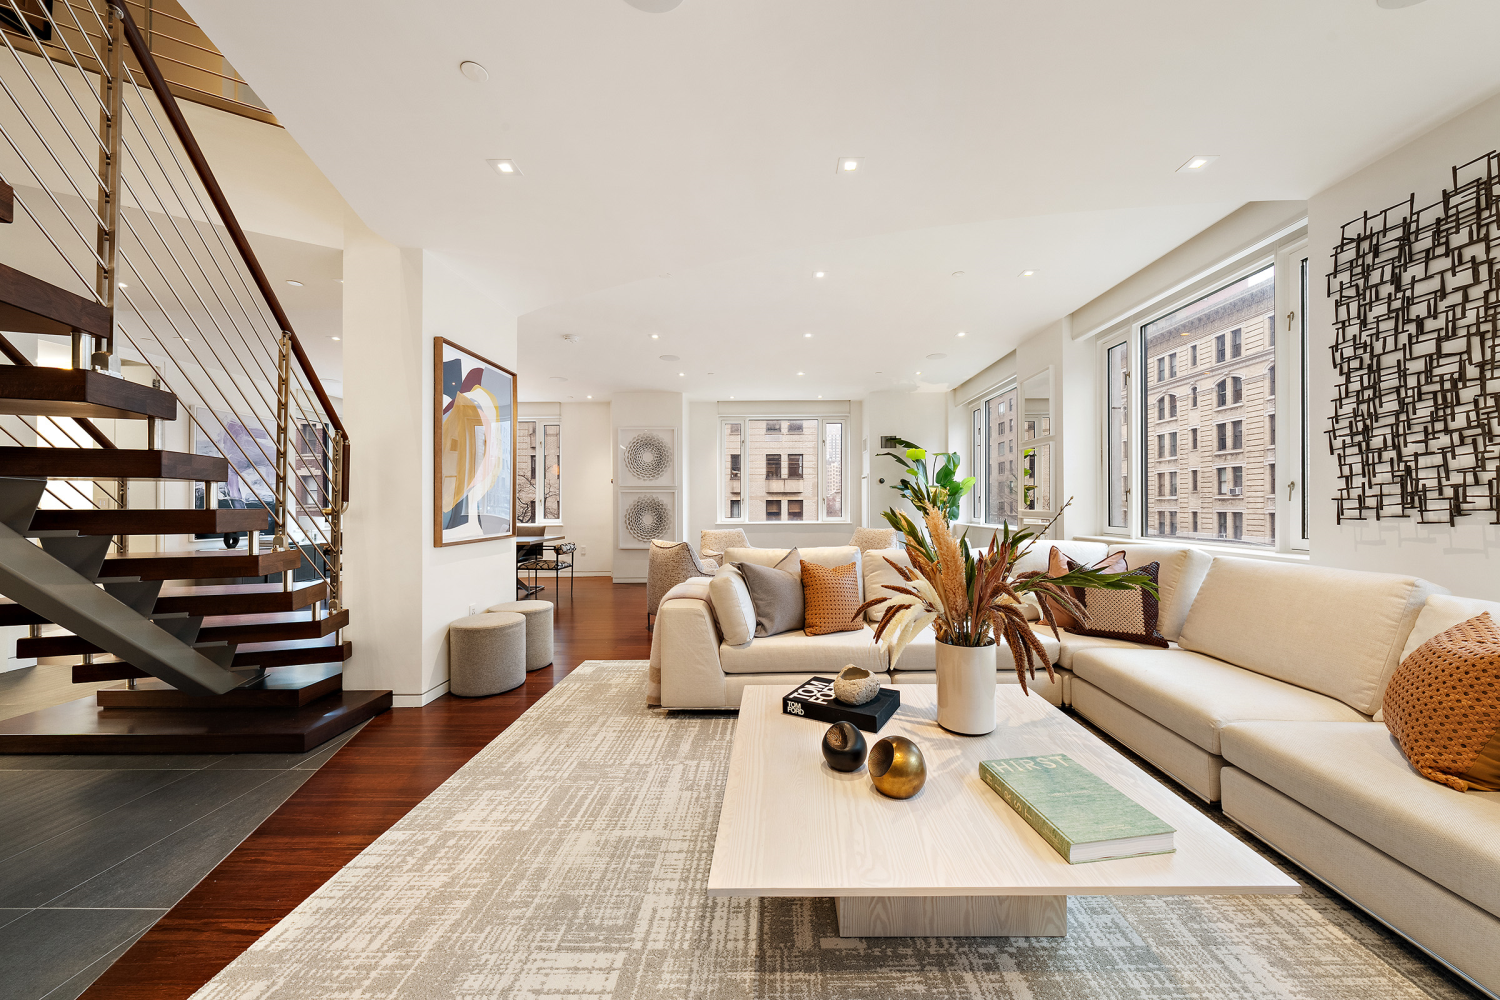 21 East 96th Street 3rd/4th, Carnegie Hill, Upper East Side, NYC - 6 Bedrooms  
5.5 Bathrooms  
14 Rooms - 